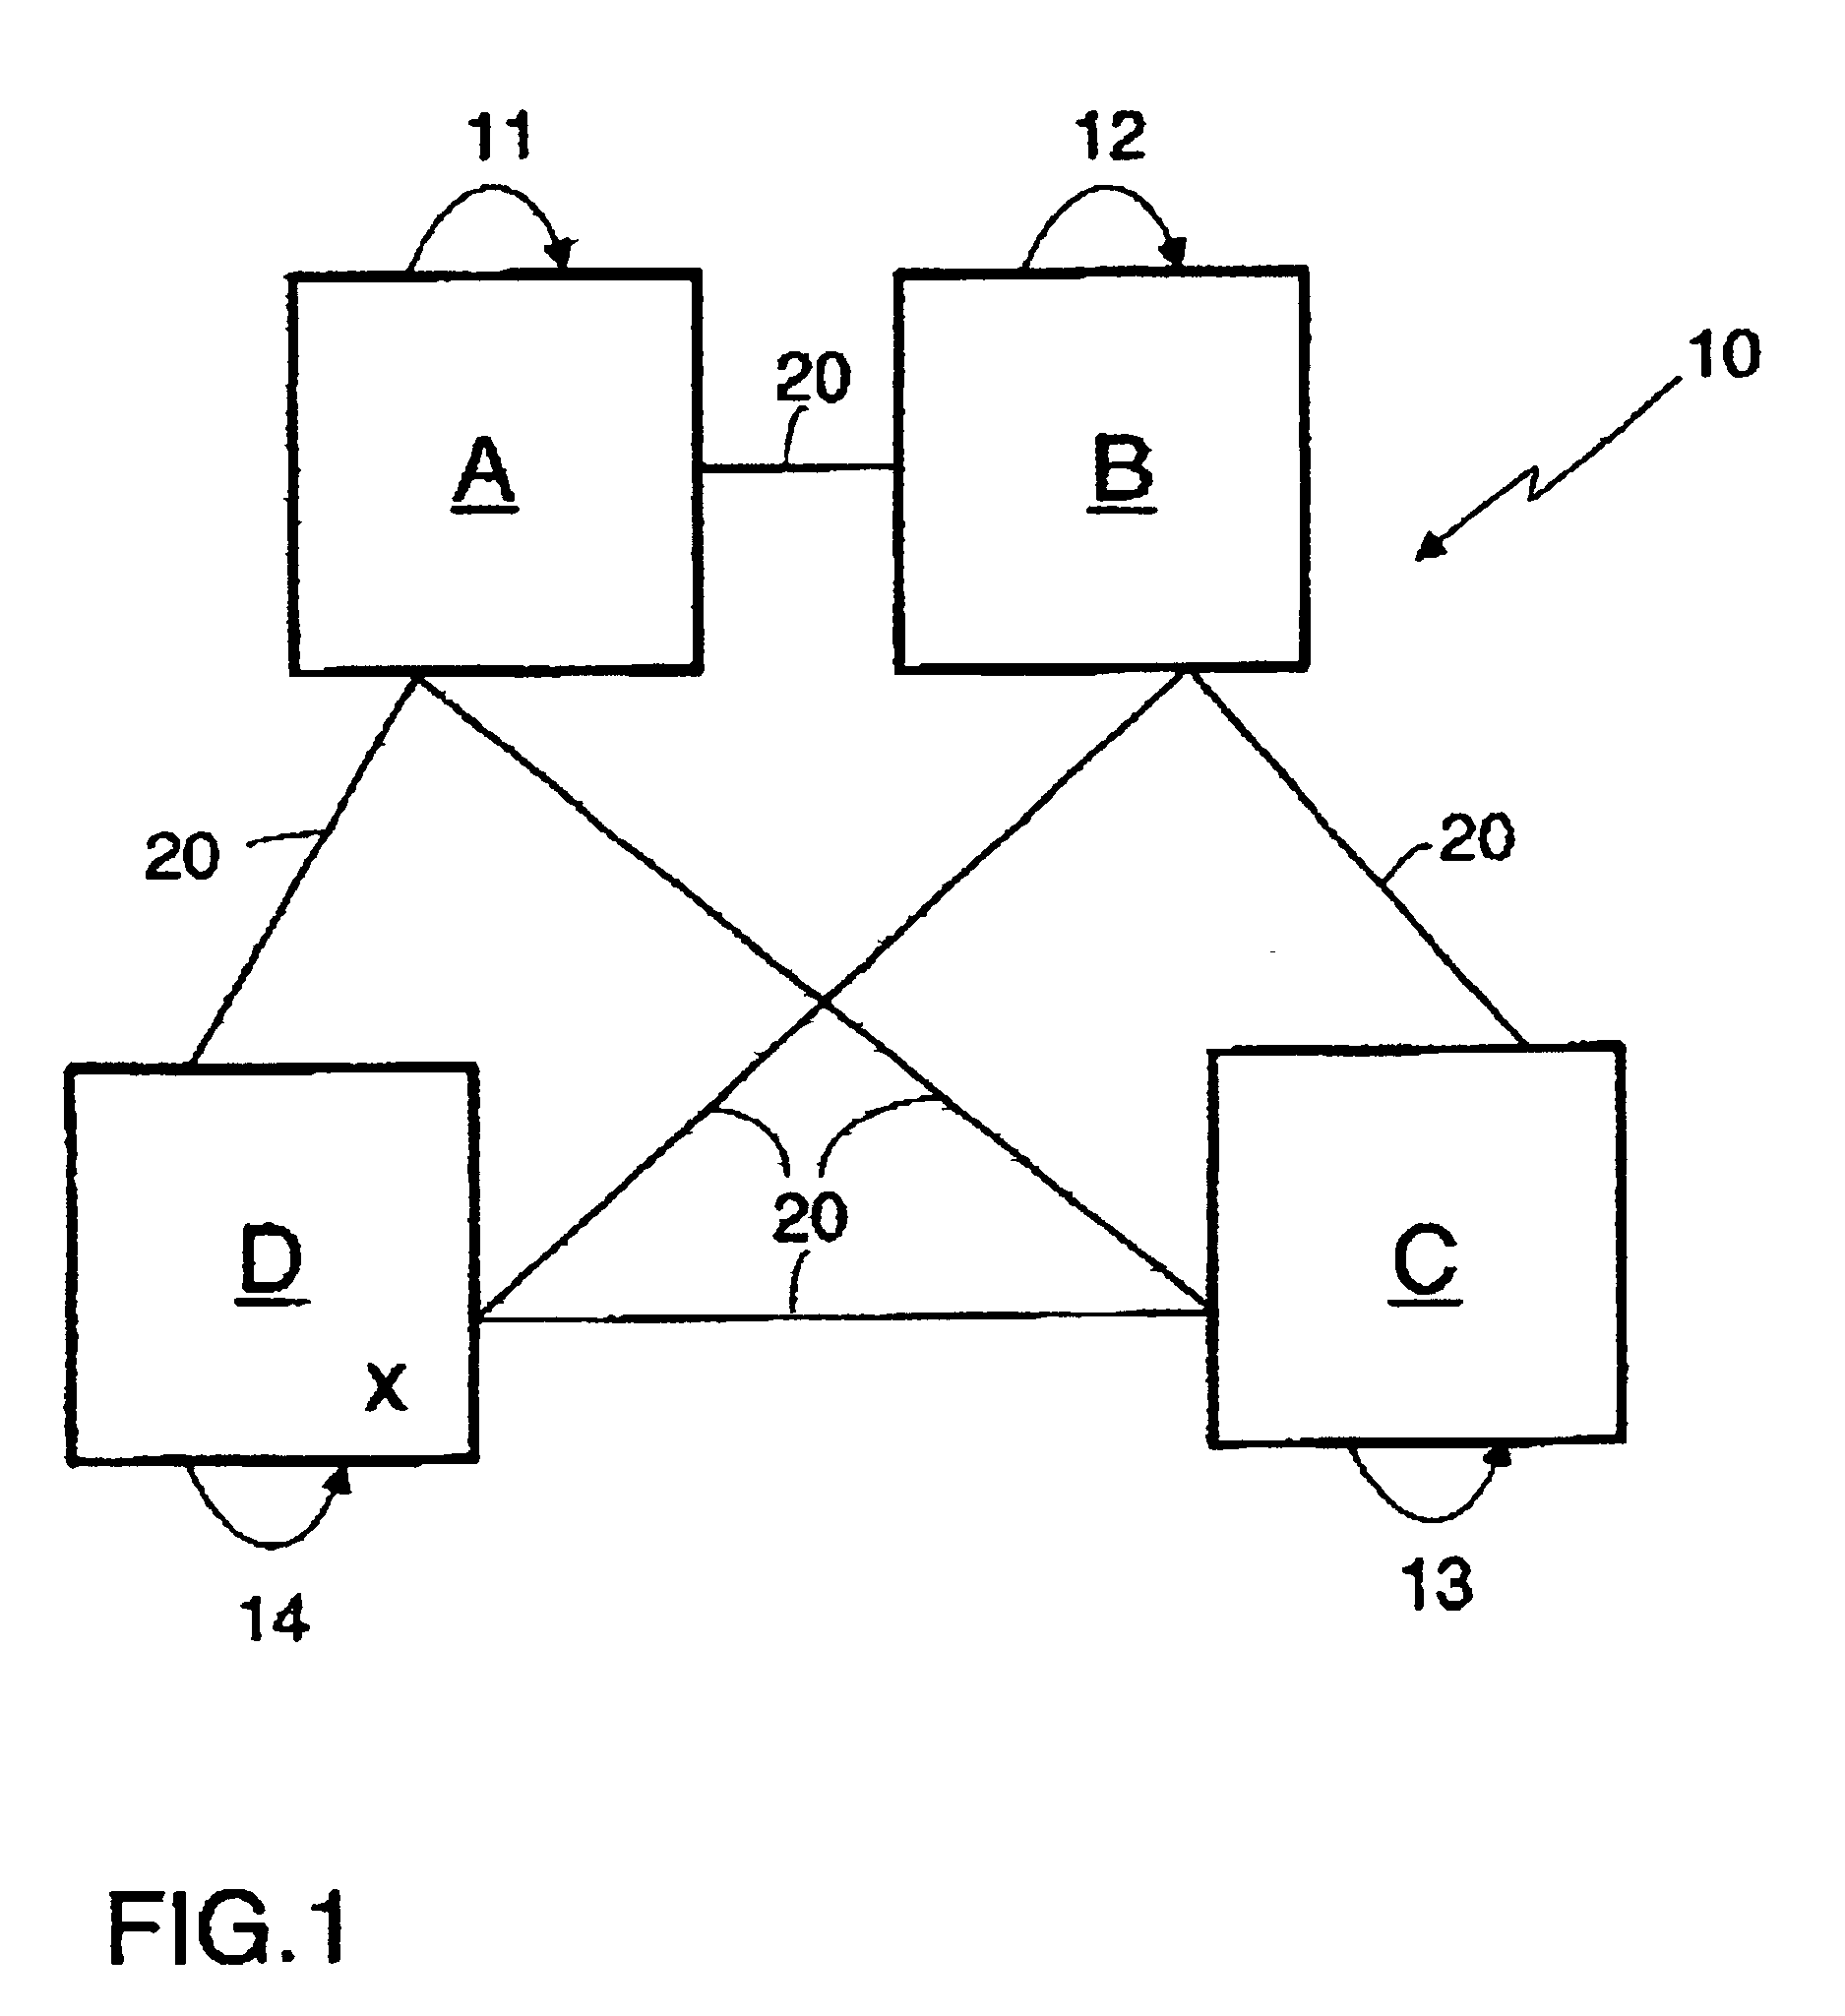 Method of achieving multiple processor agreement in asynchronous networks